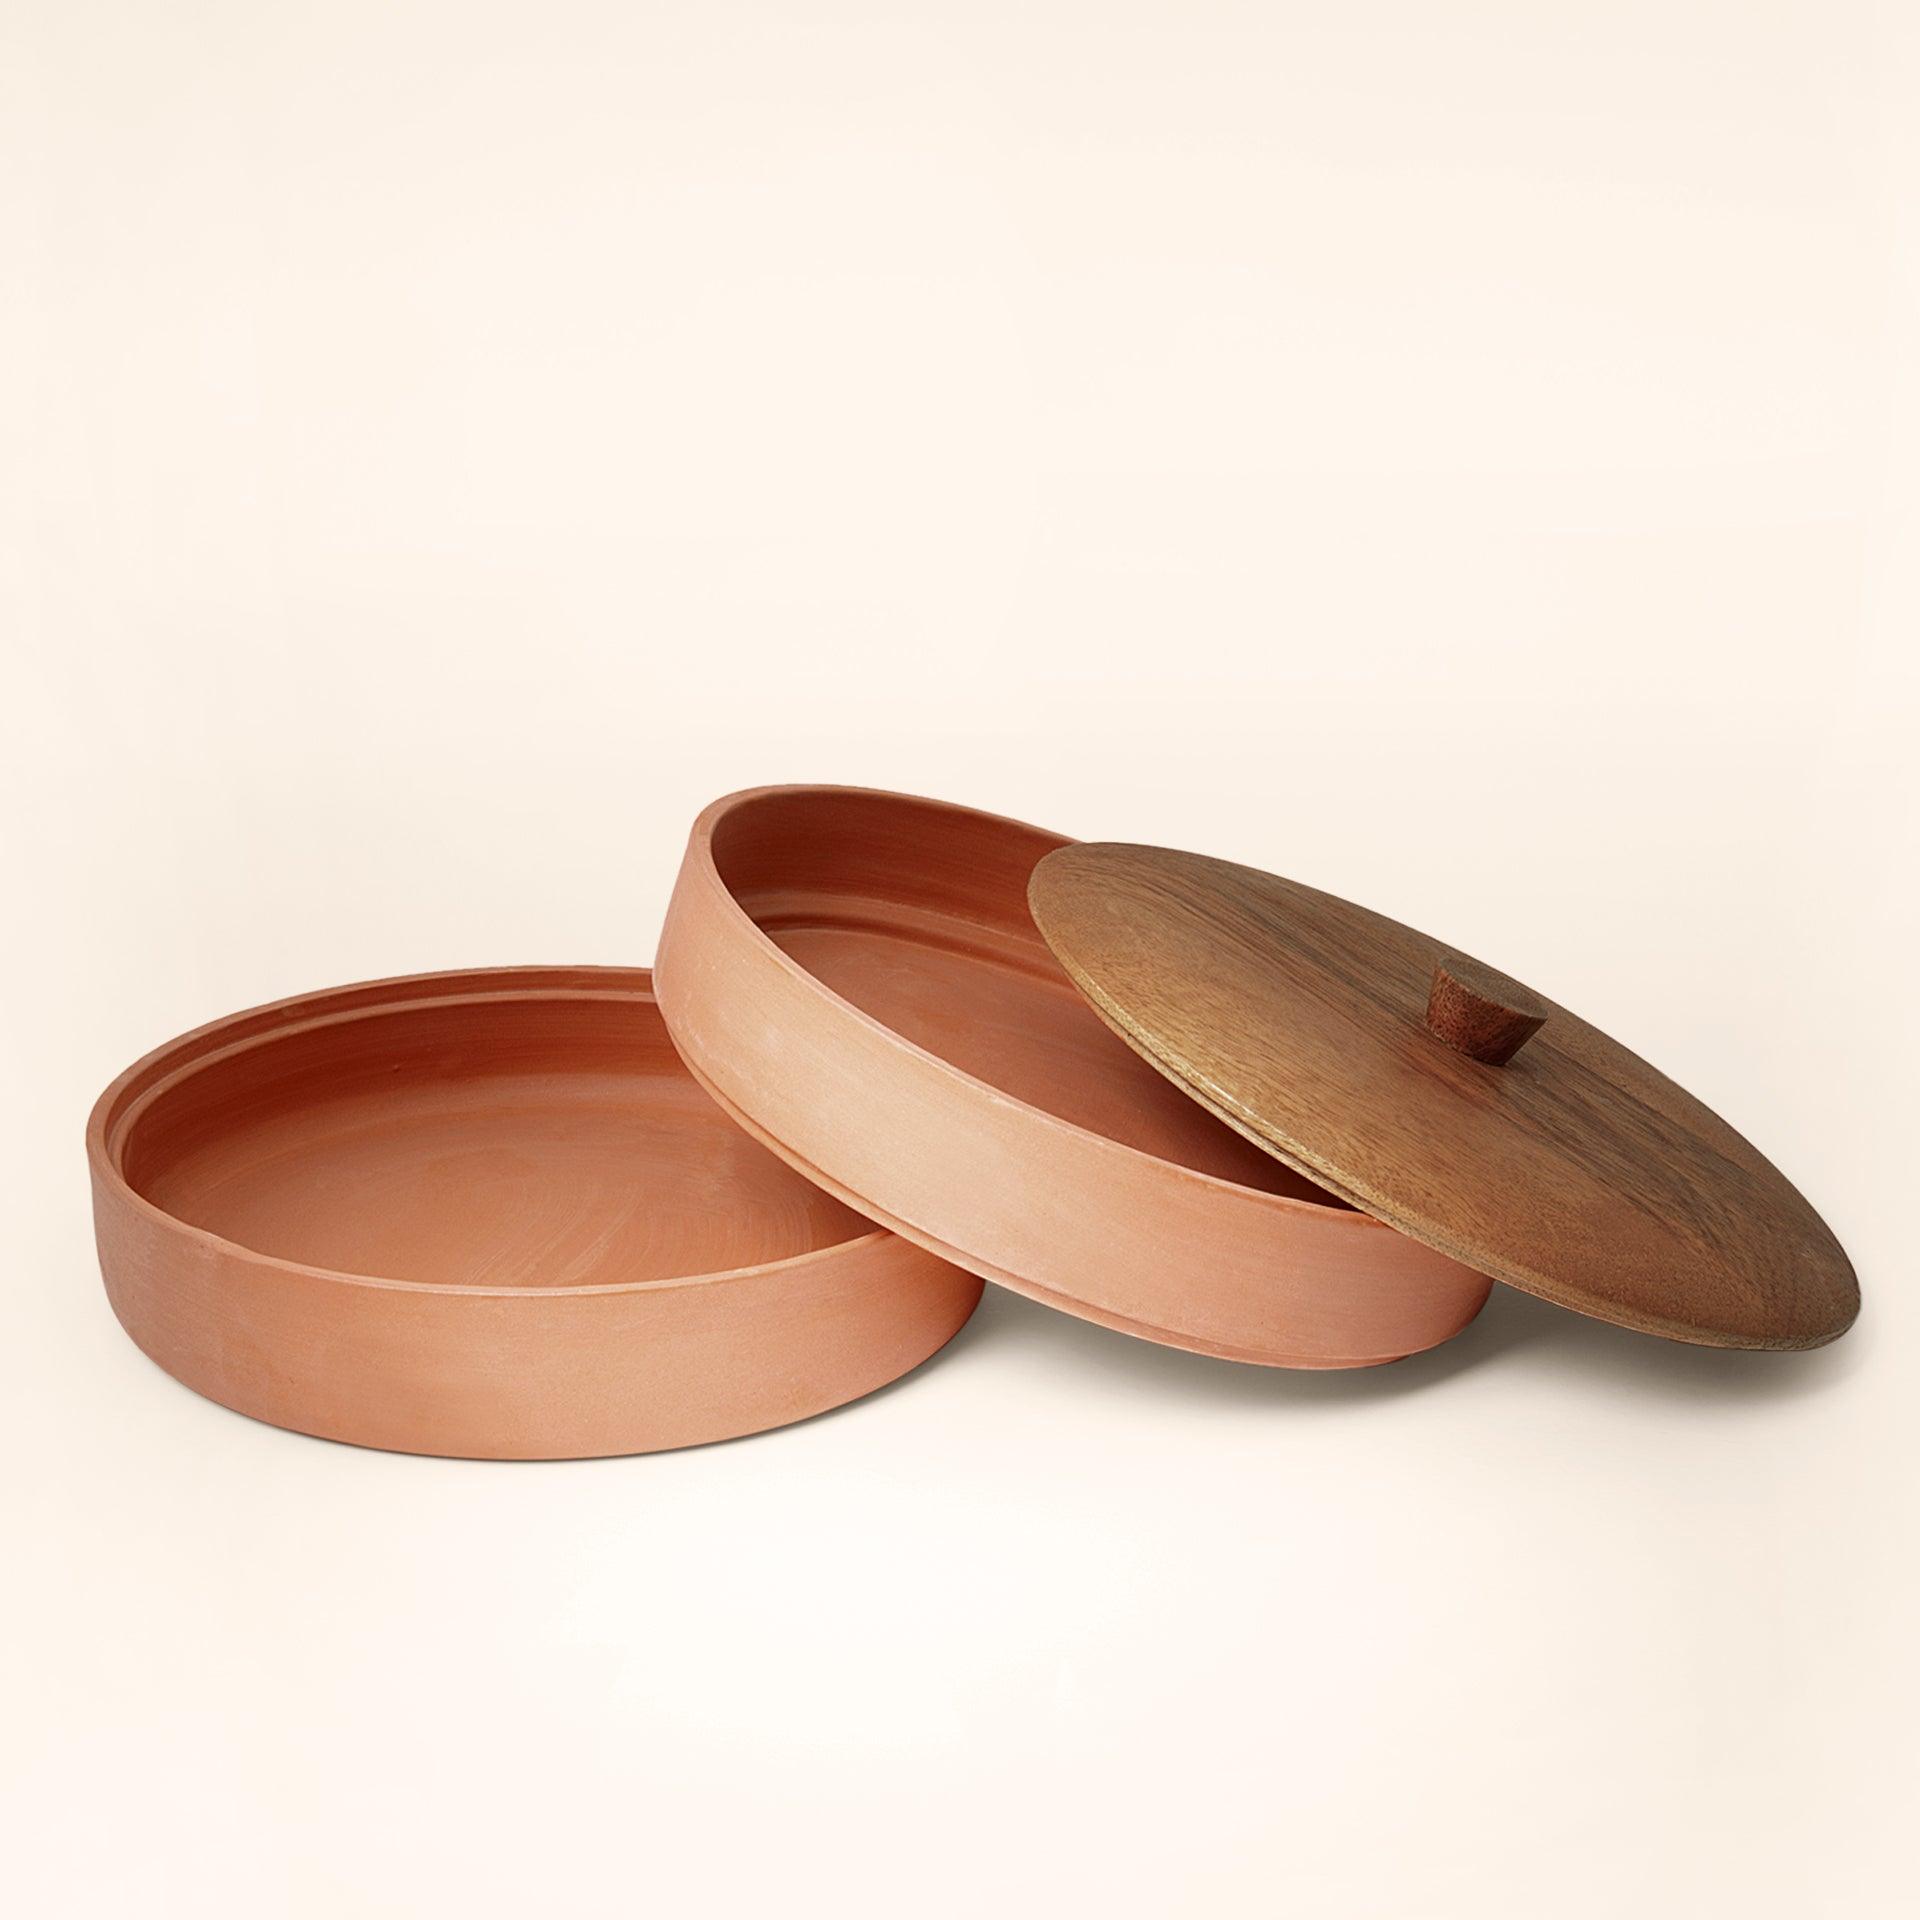 terracotta sprouter with wooden lid